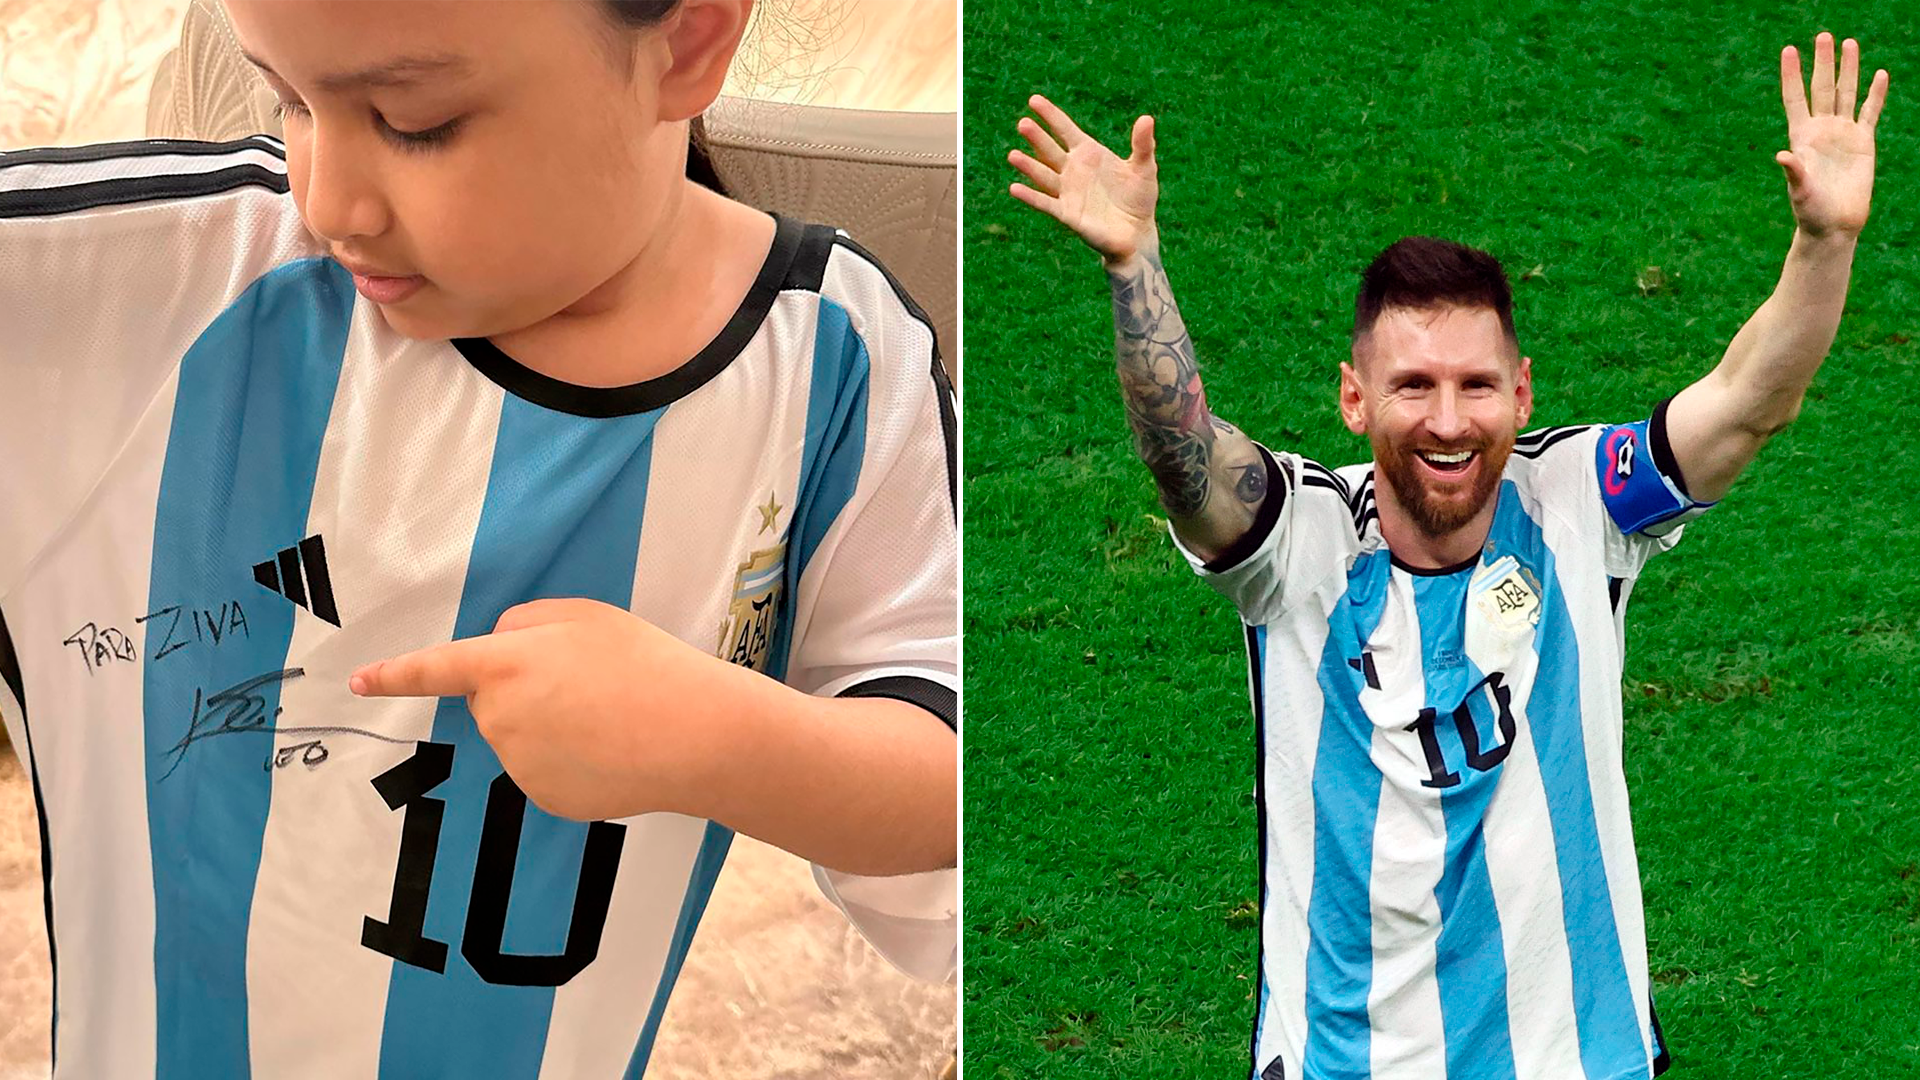 Lionel Messi received a special gift before his return to